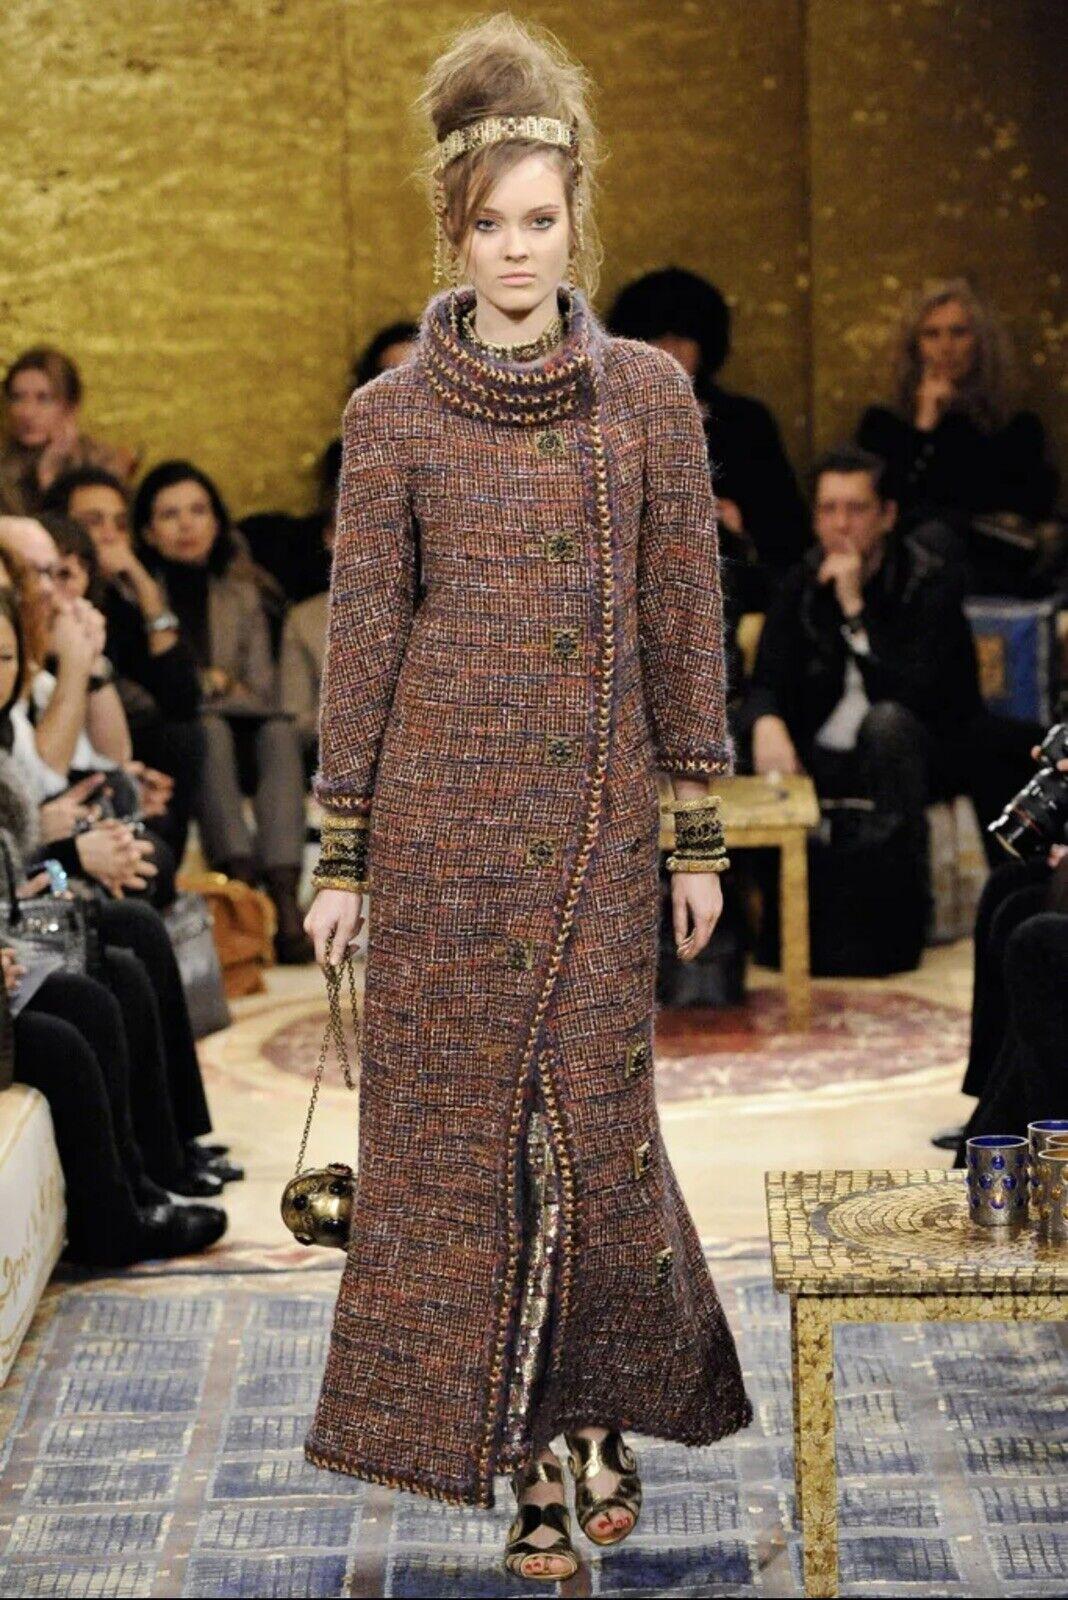 Marvellous Chanel lesage tweed coat with jewel Gripoix buttons from Runway of Paris / BYZANCE Collection.
Retailed for over 10,000$
Size mark 48 FR. Pristine condition.